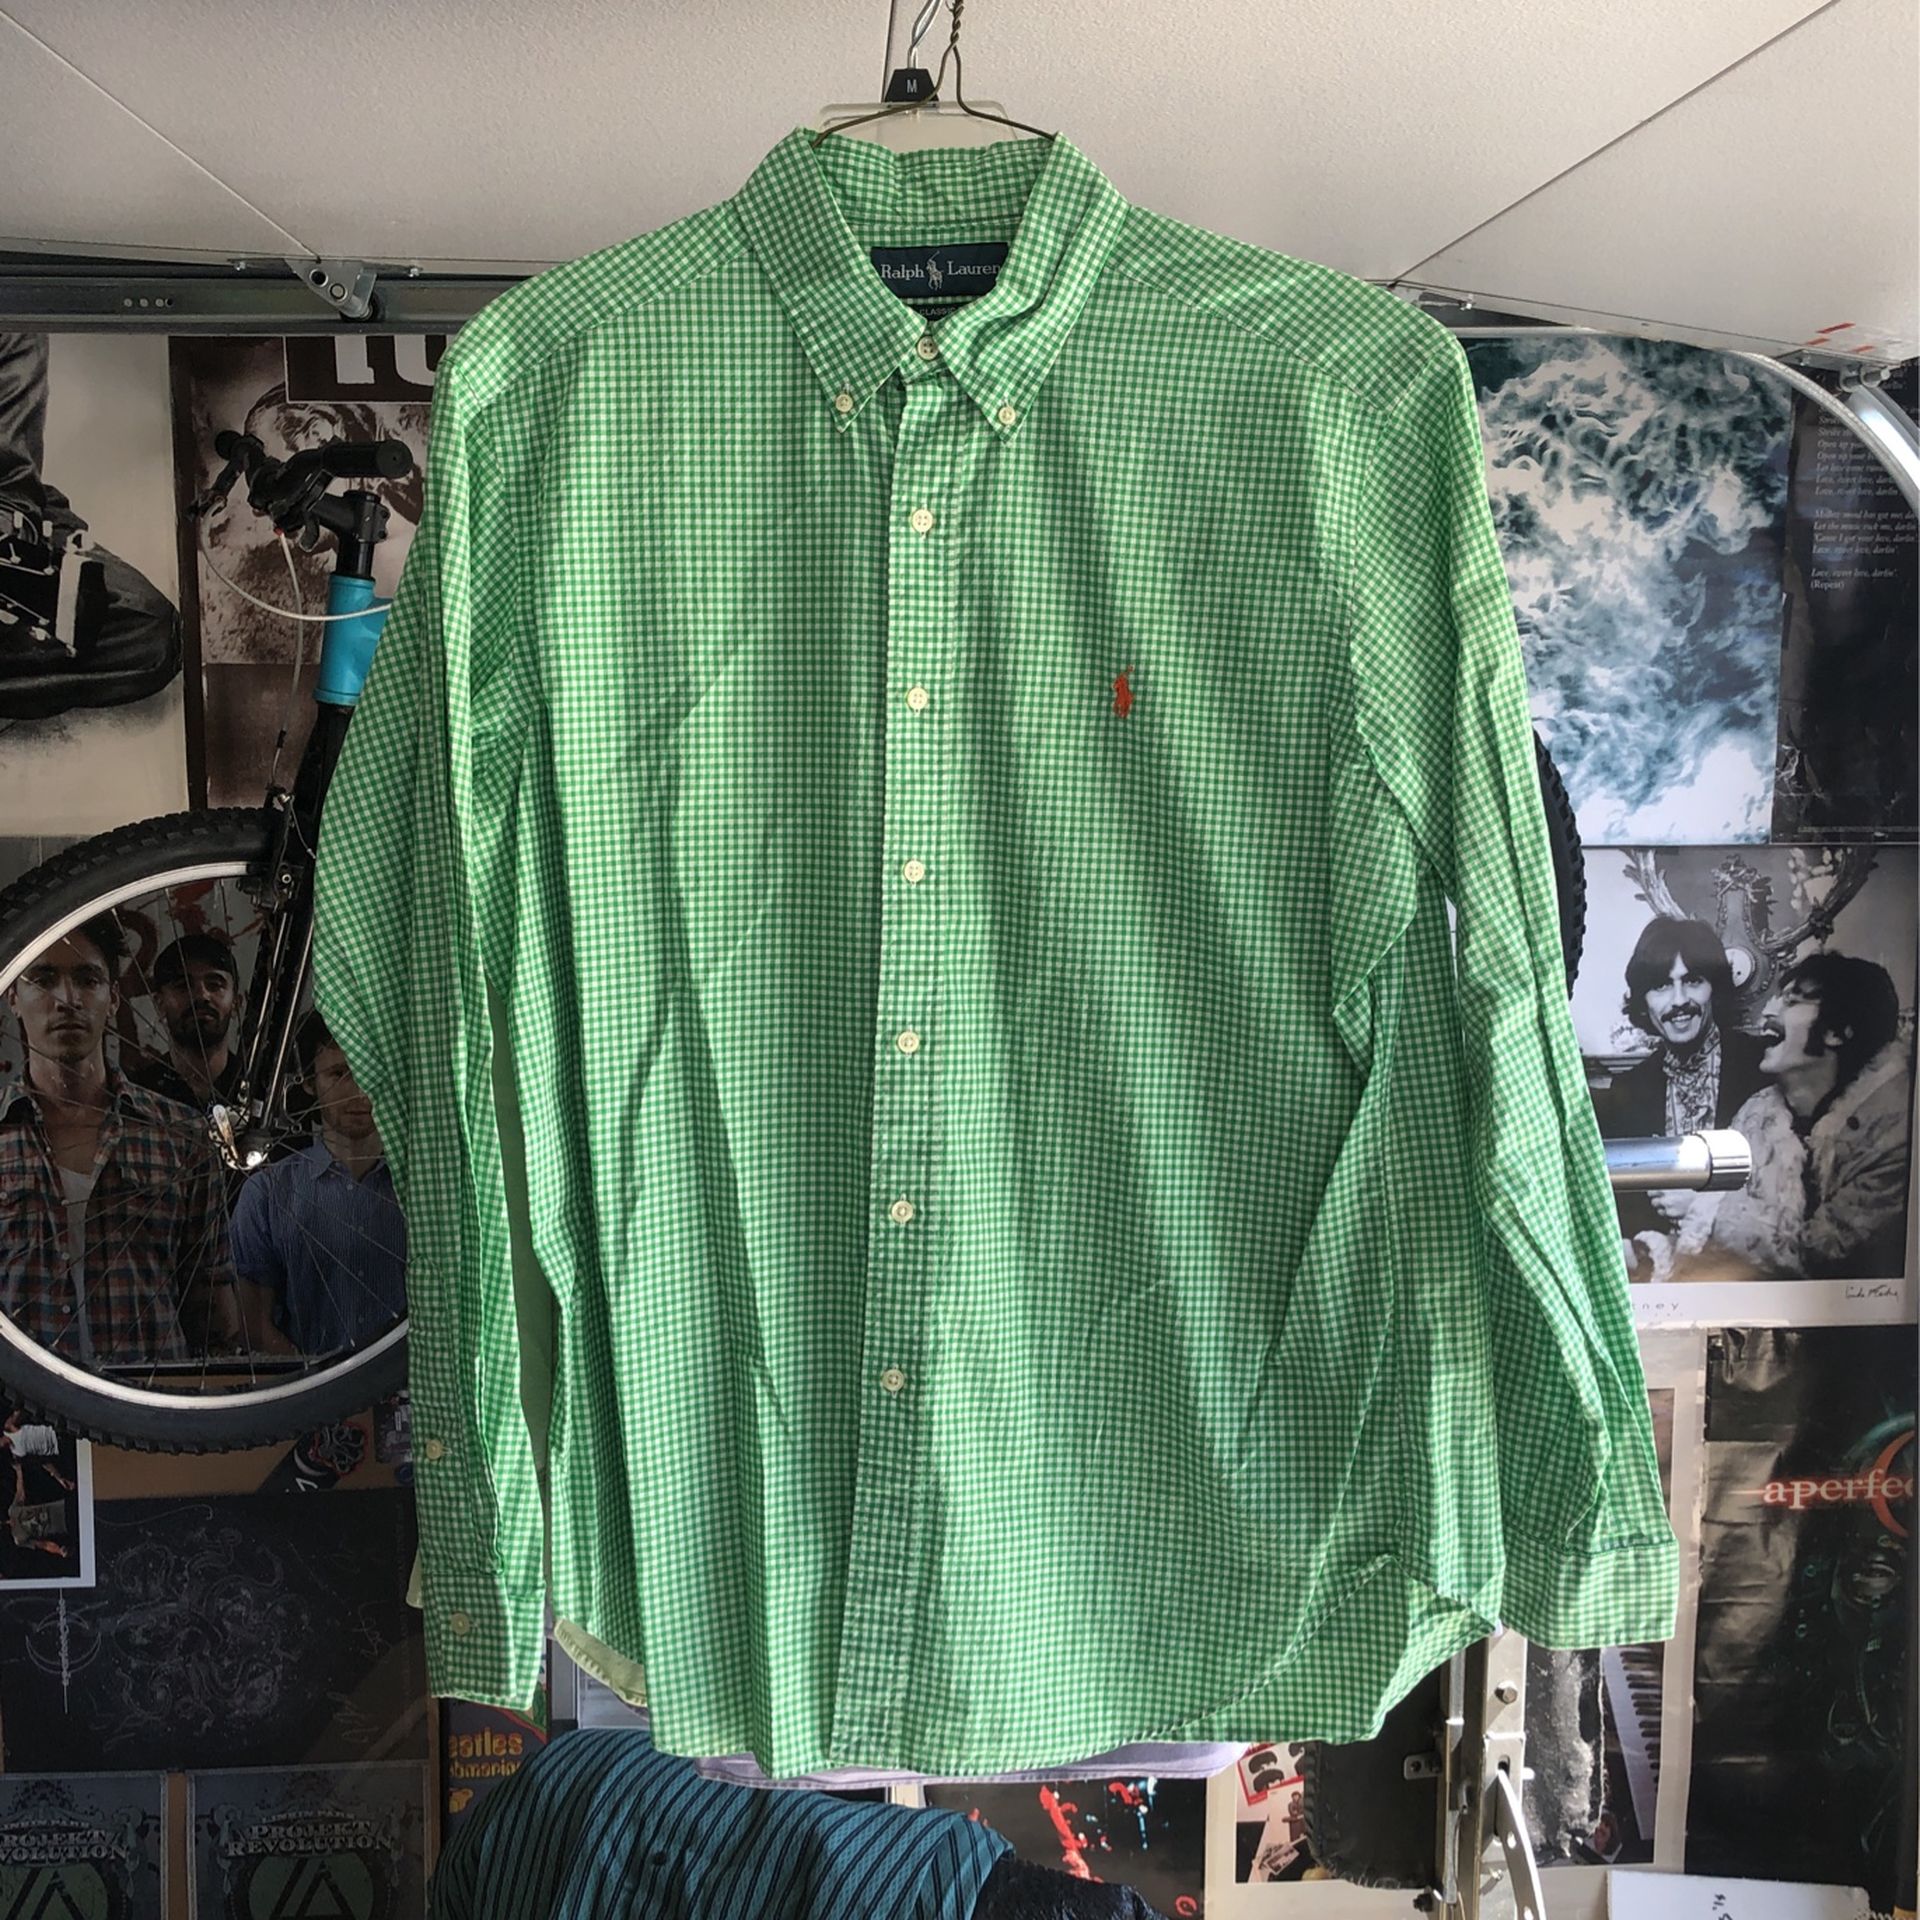 Mens Polo/Ralph Lauren - Long-Sleeve Button Up - Size Large - Classic Fit - Green/White Checkered